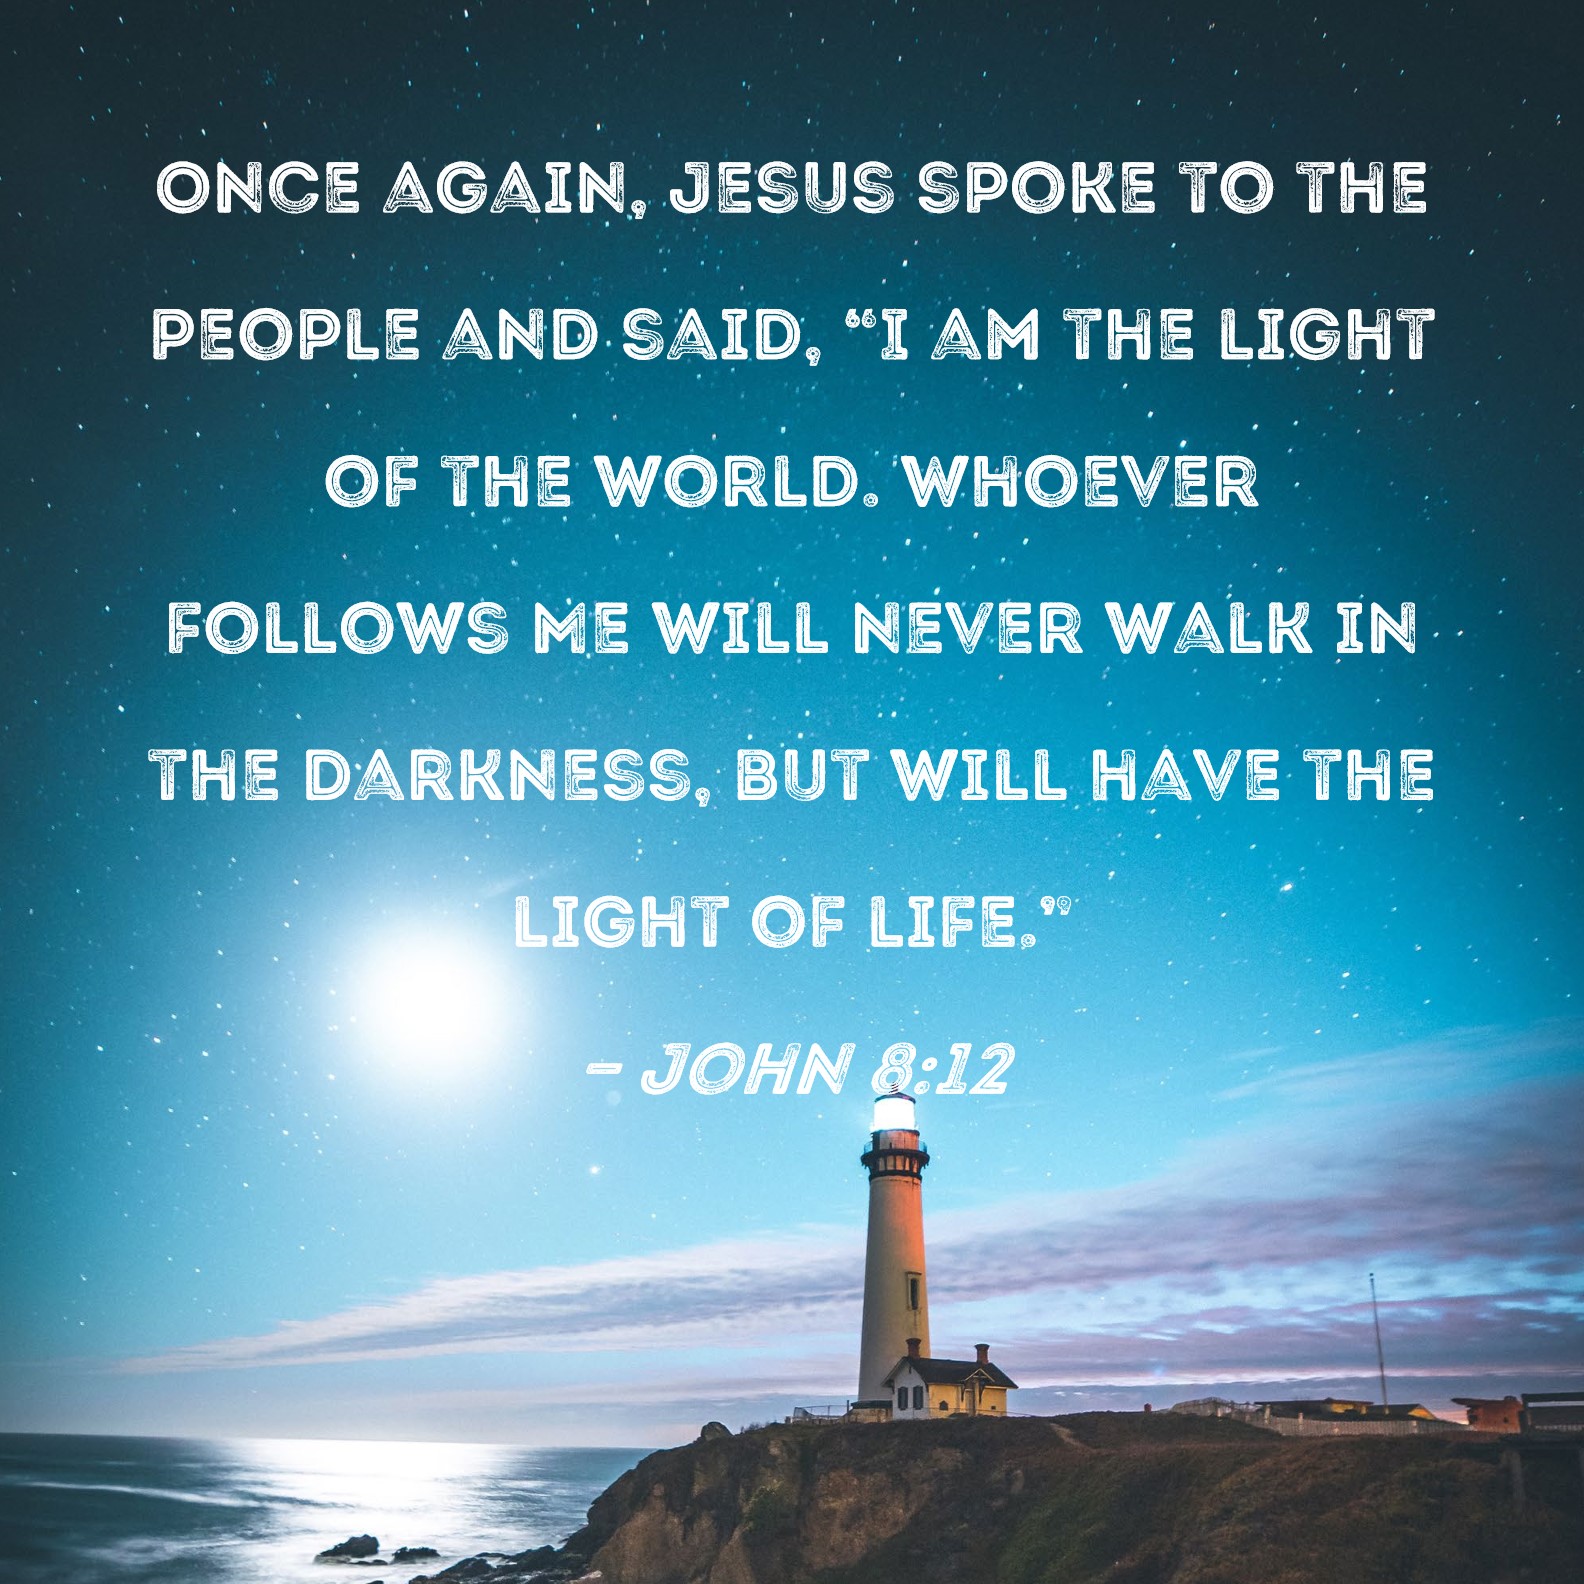 Baron dø synd John 8:12 Once again, Jesus spoke to the people and said, "I am the light  of the world. Whoever follows Me will never walk in the darkness, but will  have the light